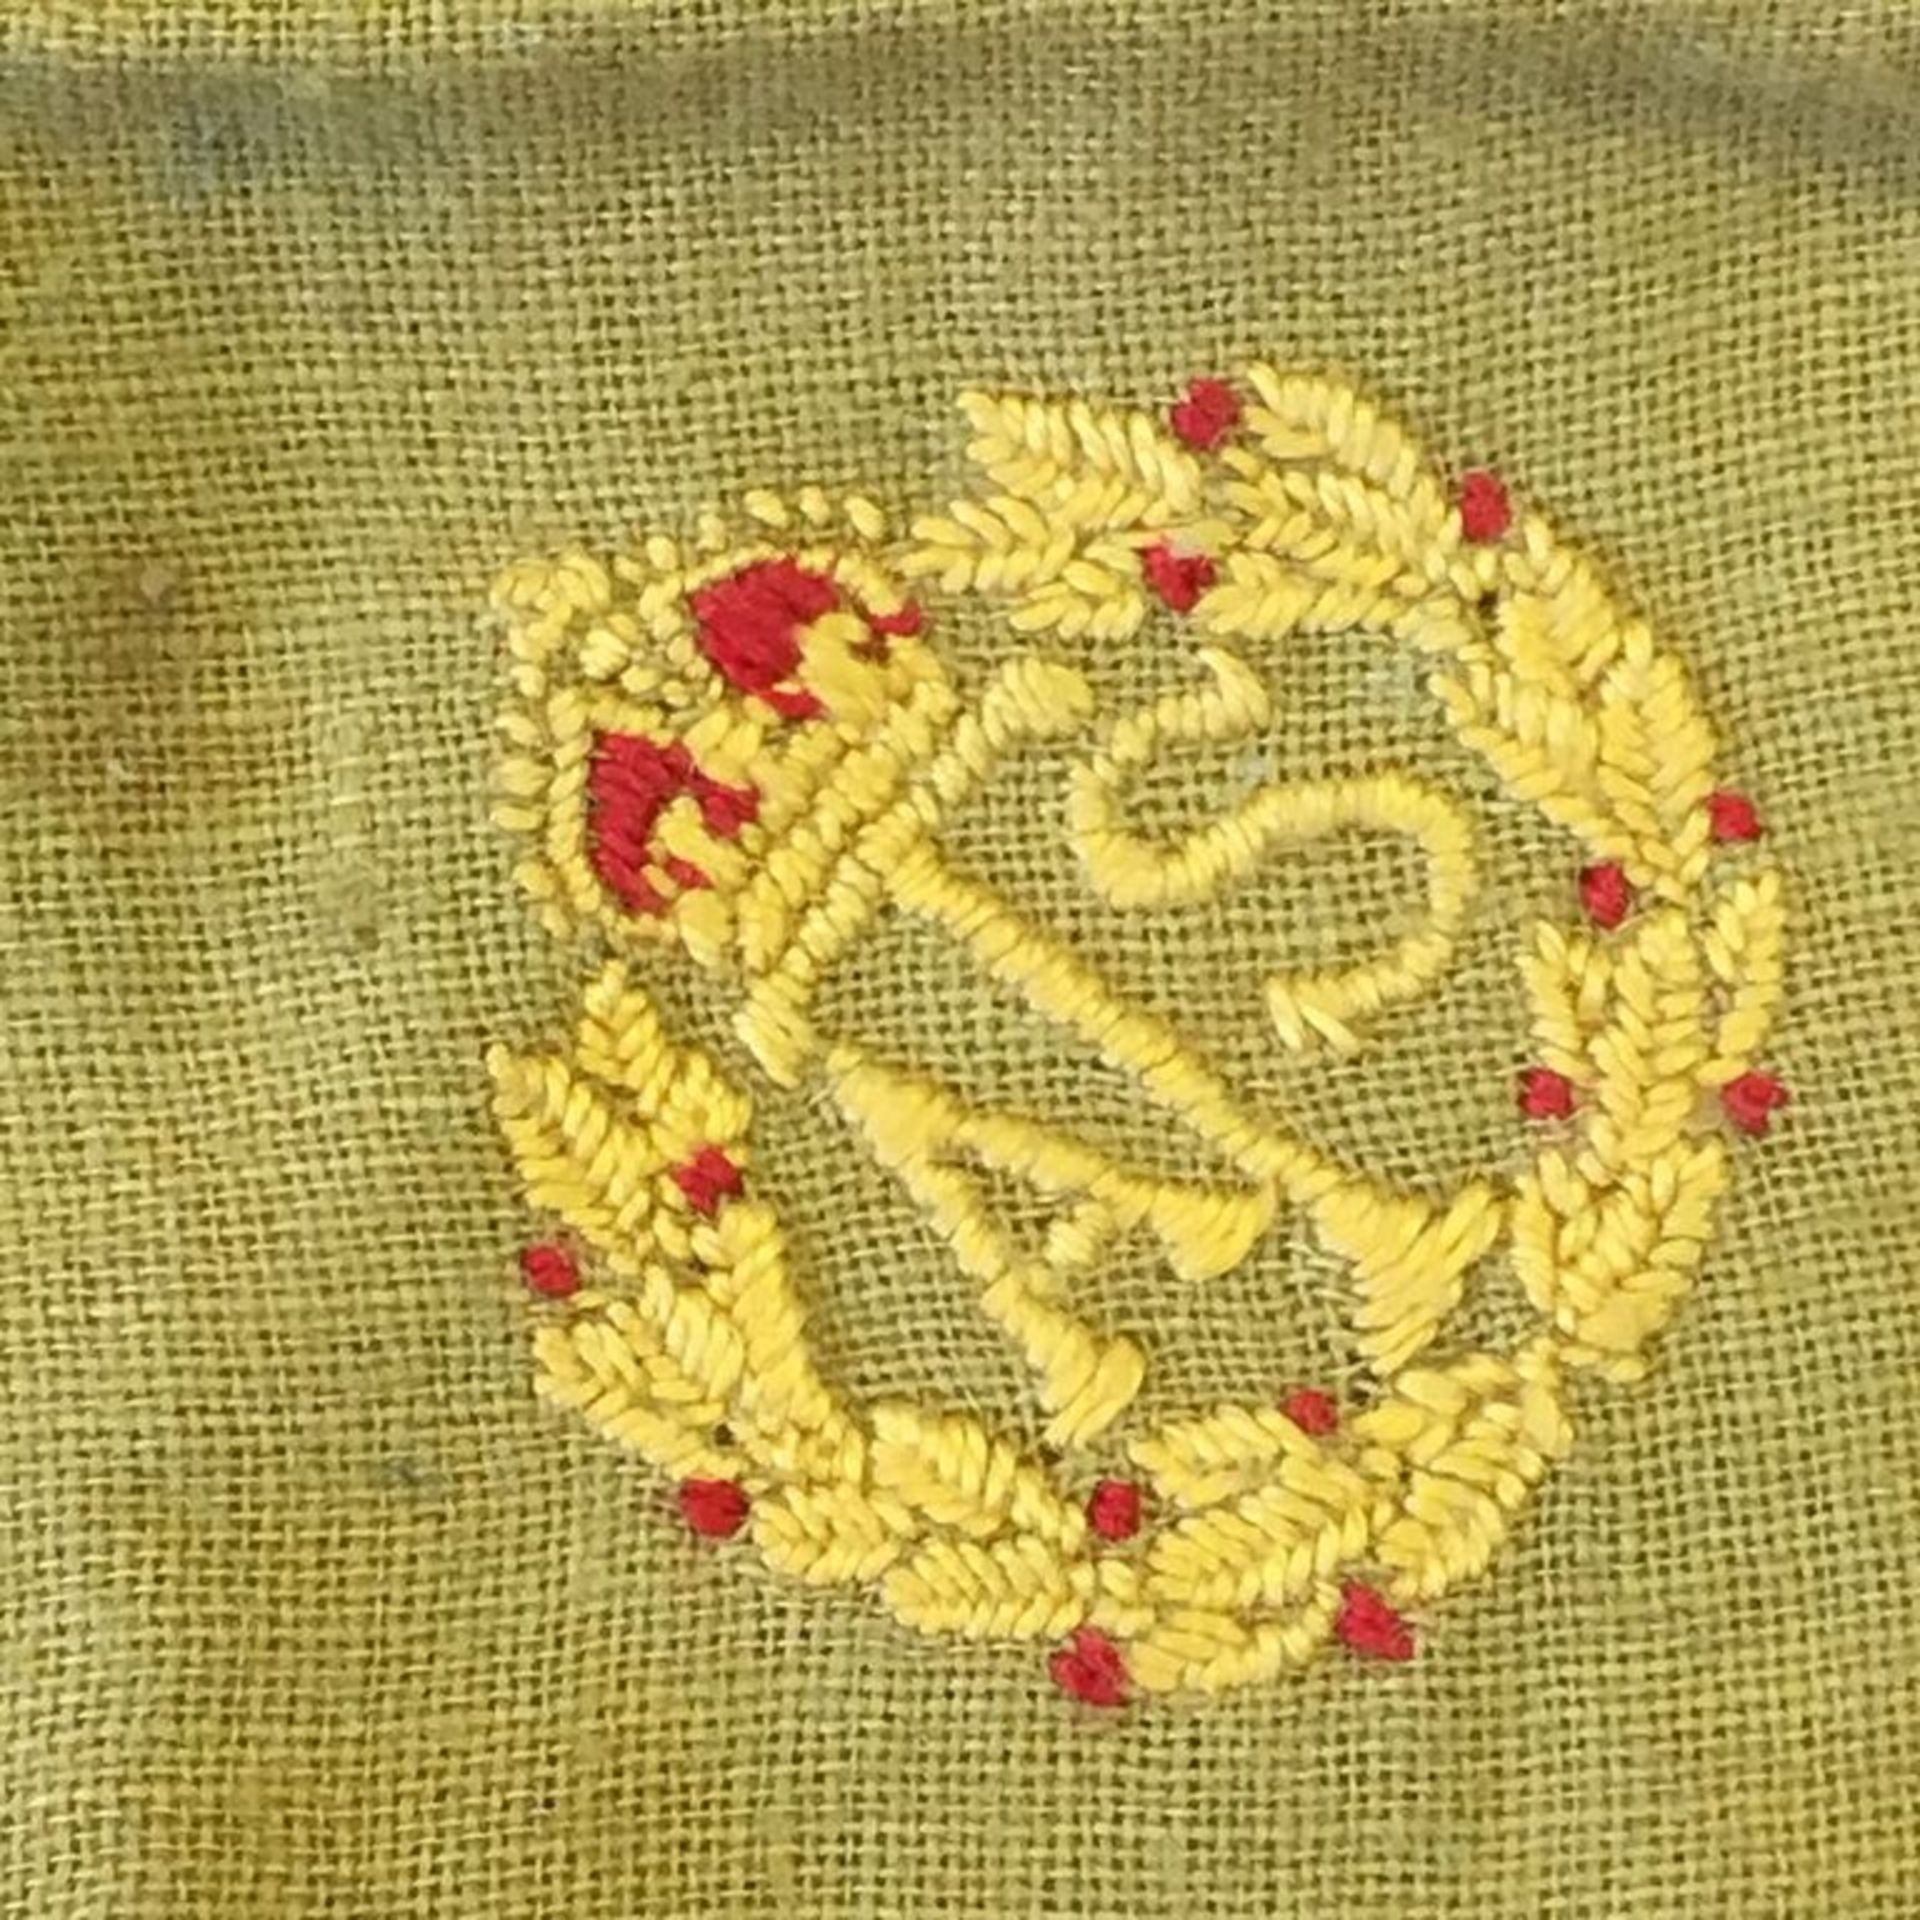 WW2 EMBROIDERED ATS (AUXILIARY TERRITORIAL SERVICE) ARMY HANDKERCHIEF - WOMEN IN WORLD WAR II - Image 2 of 2